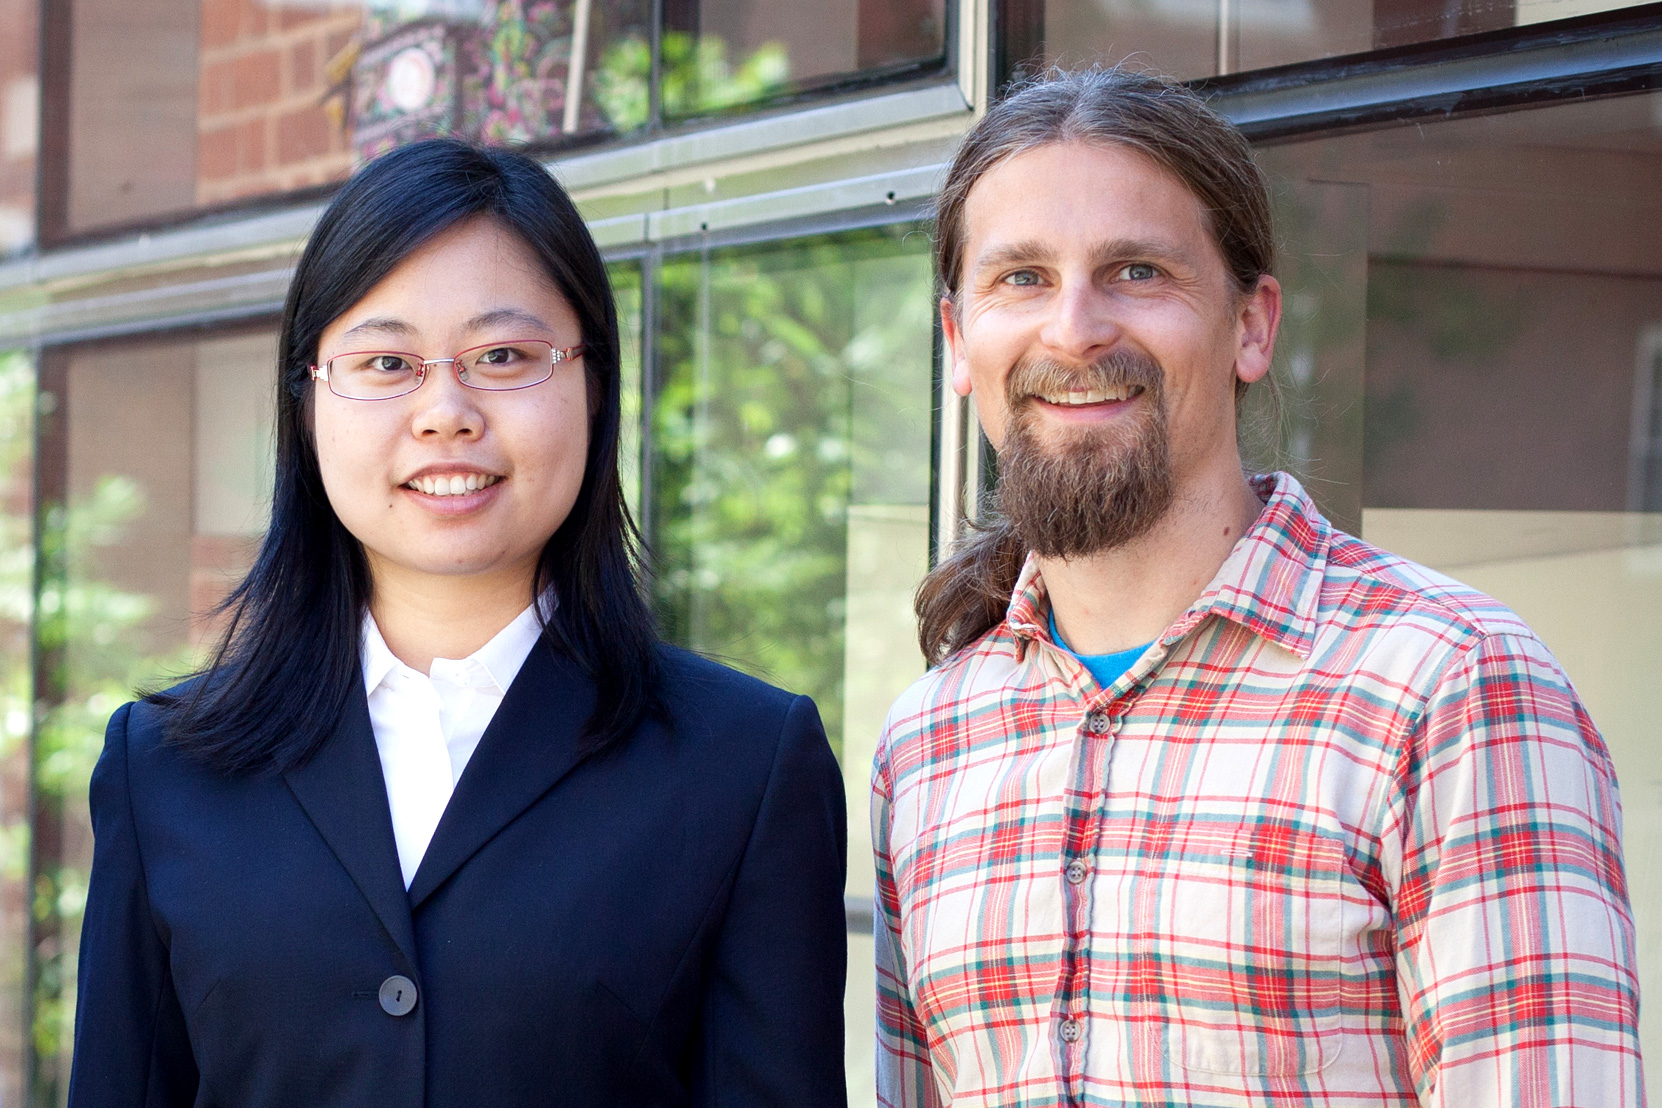 Lin Bai, Ph.D. candidate in electrical and computer engineering, and Jon Bellona, Ph.D. candidate in music. (Photos courtesy of the Data Science Institute)